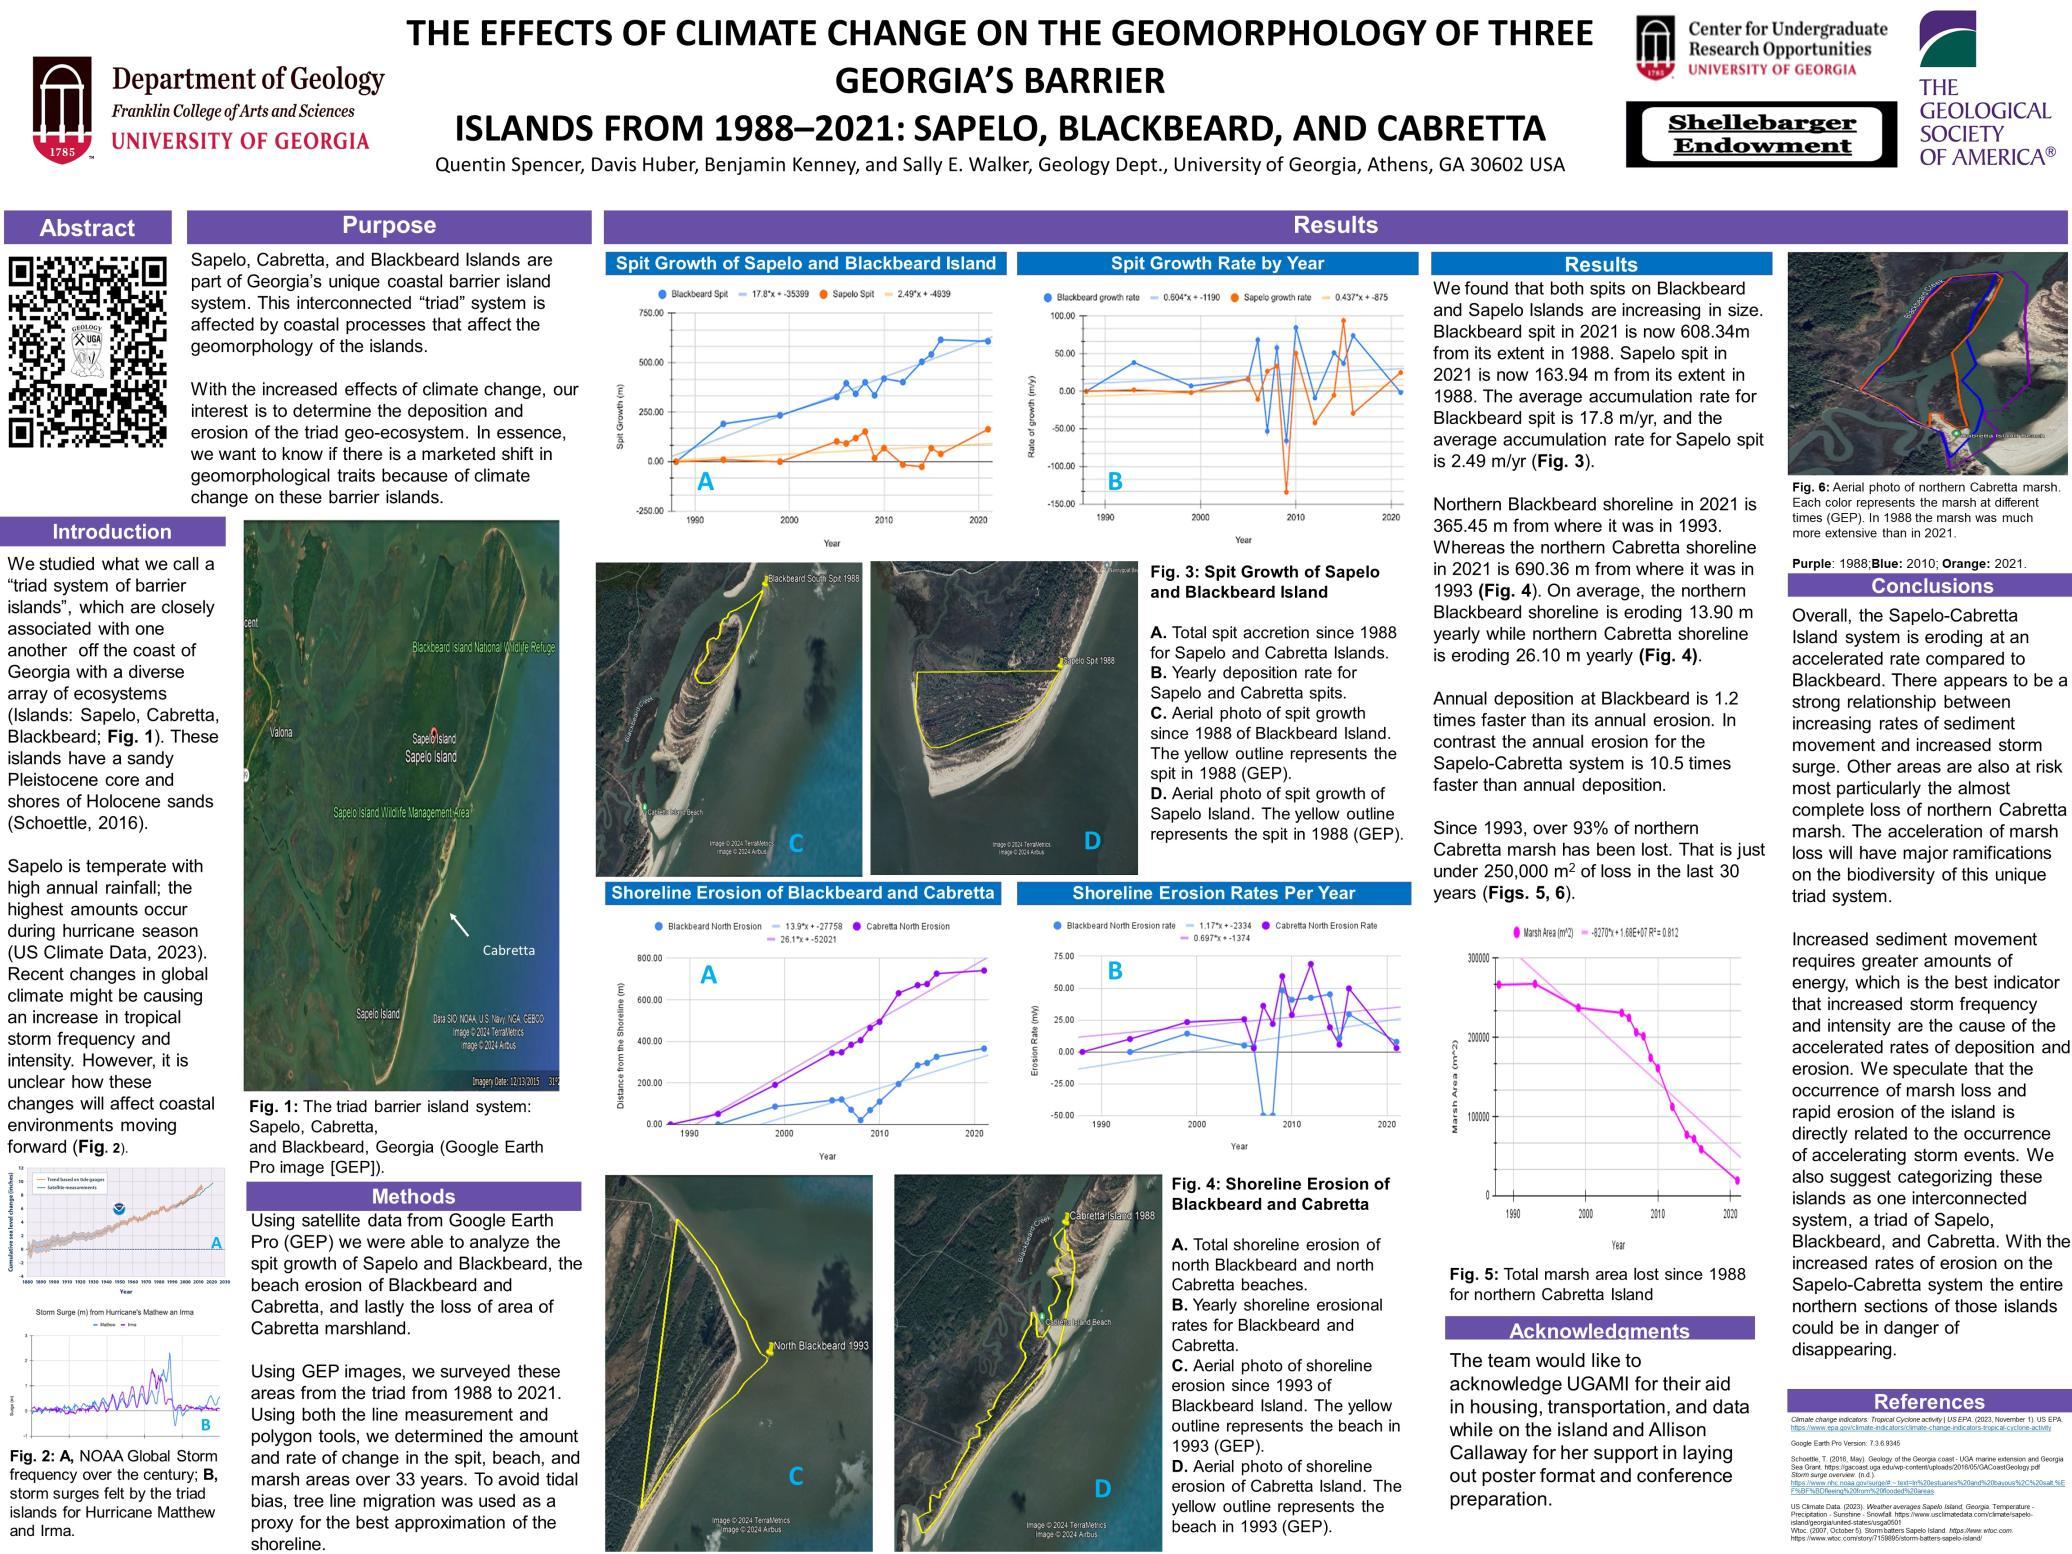 Quentin Spencer, Davis Huber and Benny Kenney - The Effects of Climate Change on the Geomorphology of three Georgia Barrier Islands from 1988–2021: Sapelo, Blackbeard, and Cabretta.